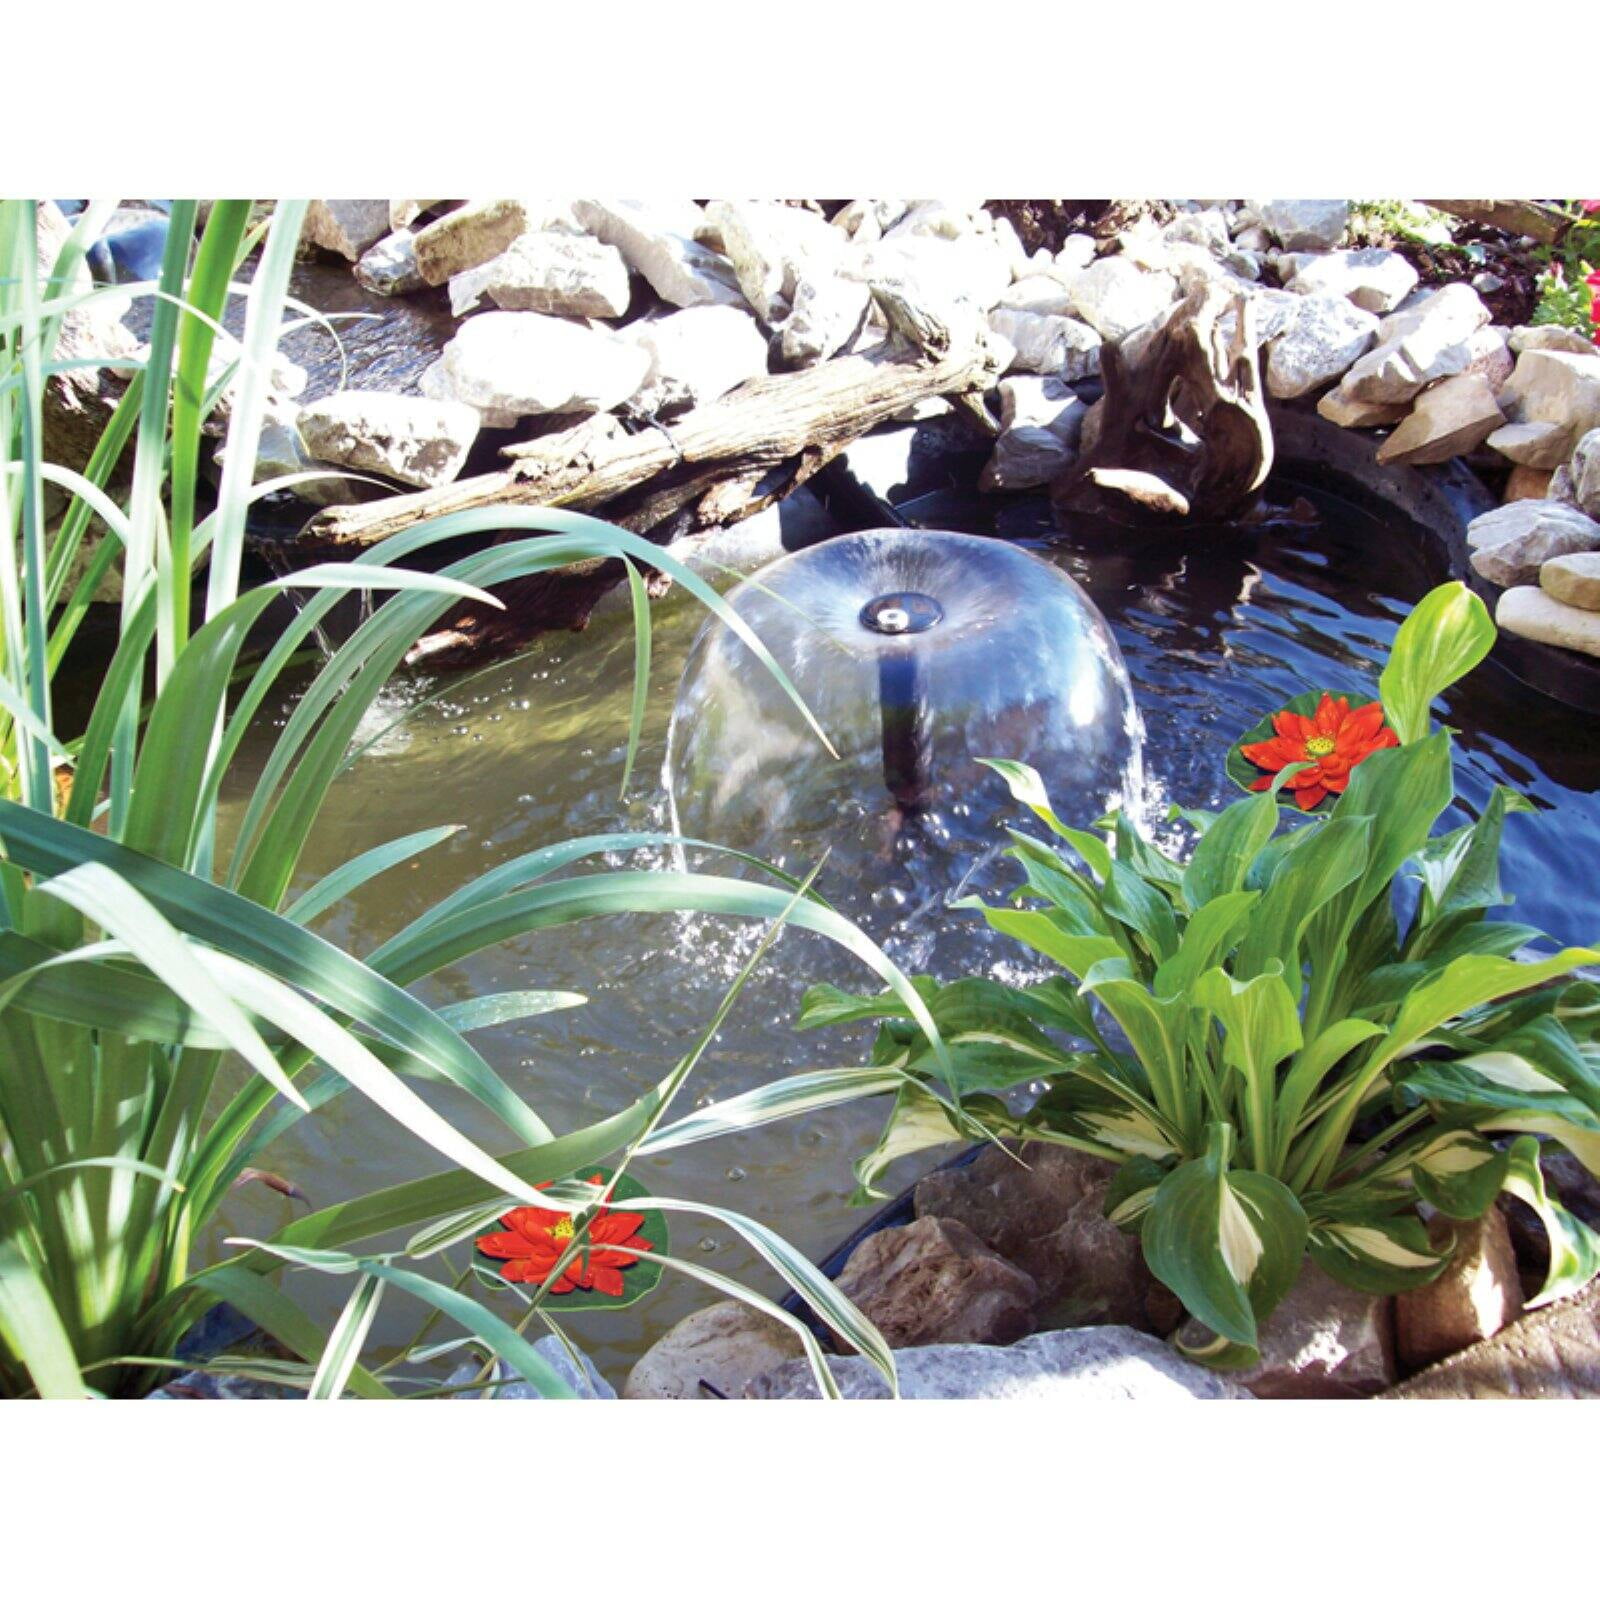 Details about   8.2/16.4Ft Fish Pond Liner Garden Pool Membrane Landscaping Supplies Equipment 